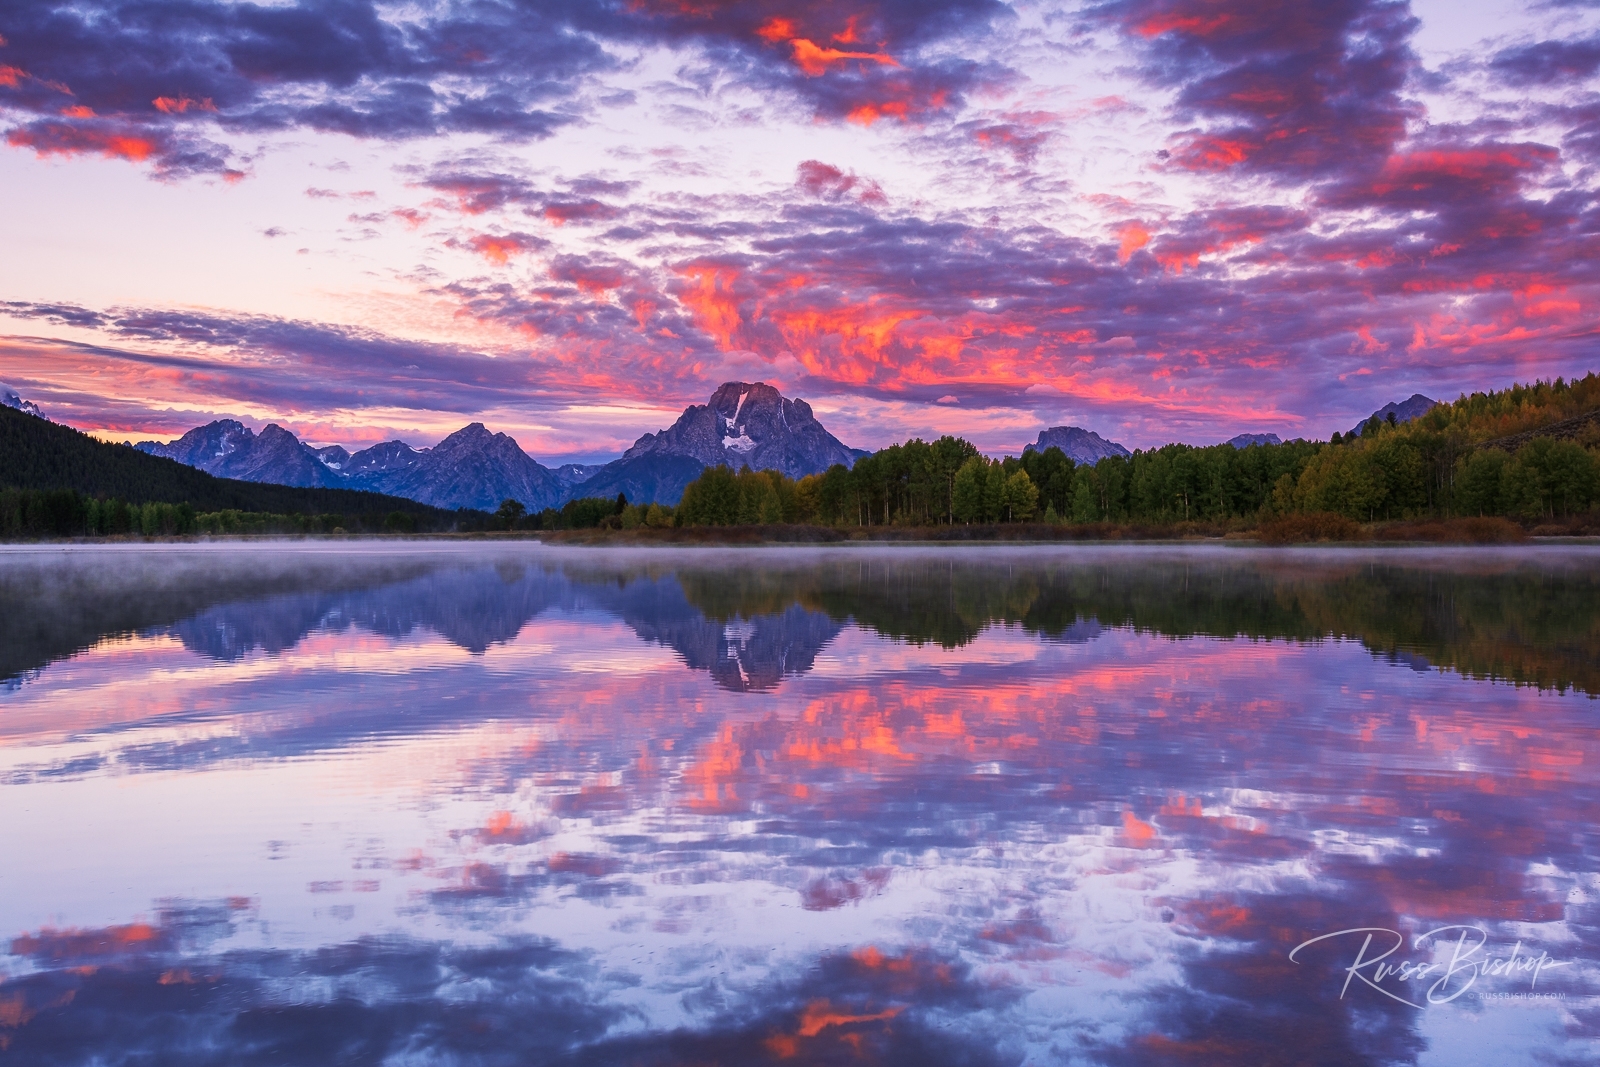 Dawn light over the Tetons from Oxbow Bend, Grand Teton National Park, Wyoming